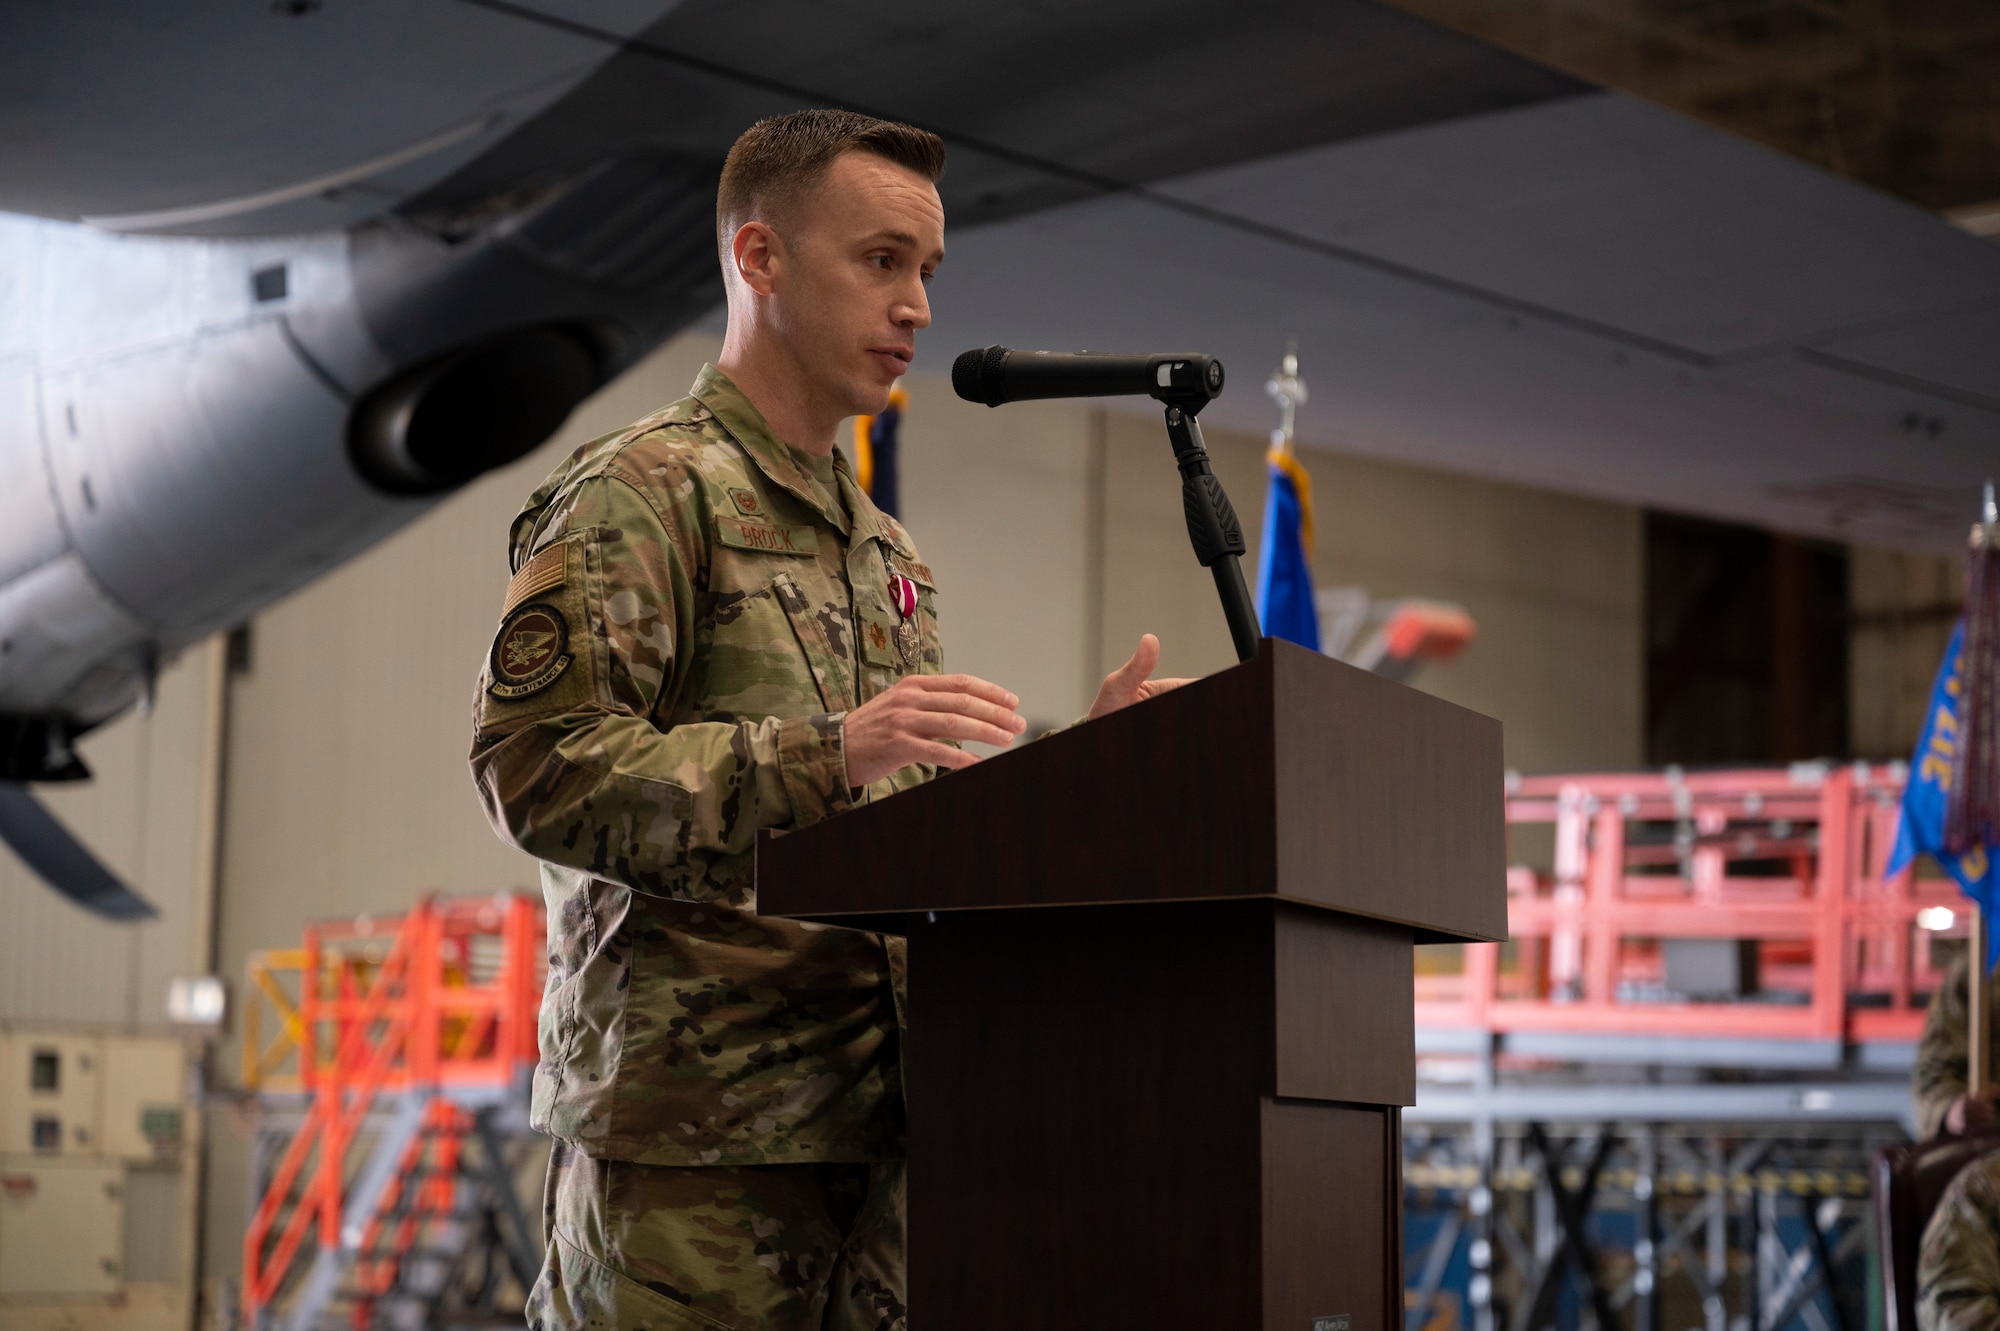 Maj. Andrew Brock, outgoing 317th Maintenance Group commander, gives his remarks during a change of command ceremony at Dyess Air Force Base, Texas, 17 Jun 2022. Brock, A C-130J Super Hercules pilot, took command of the 317th Maintenance Squadron in December of 2021. (U.S. Air Force photo by Senior Airman Reilly McGuire)